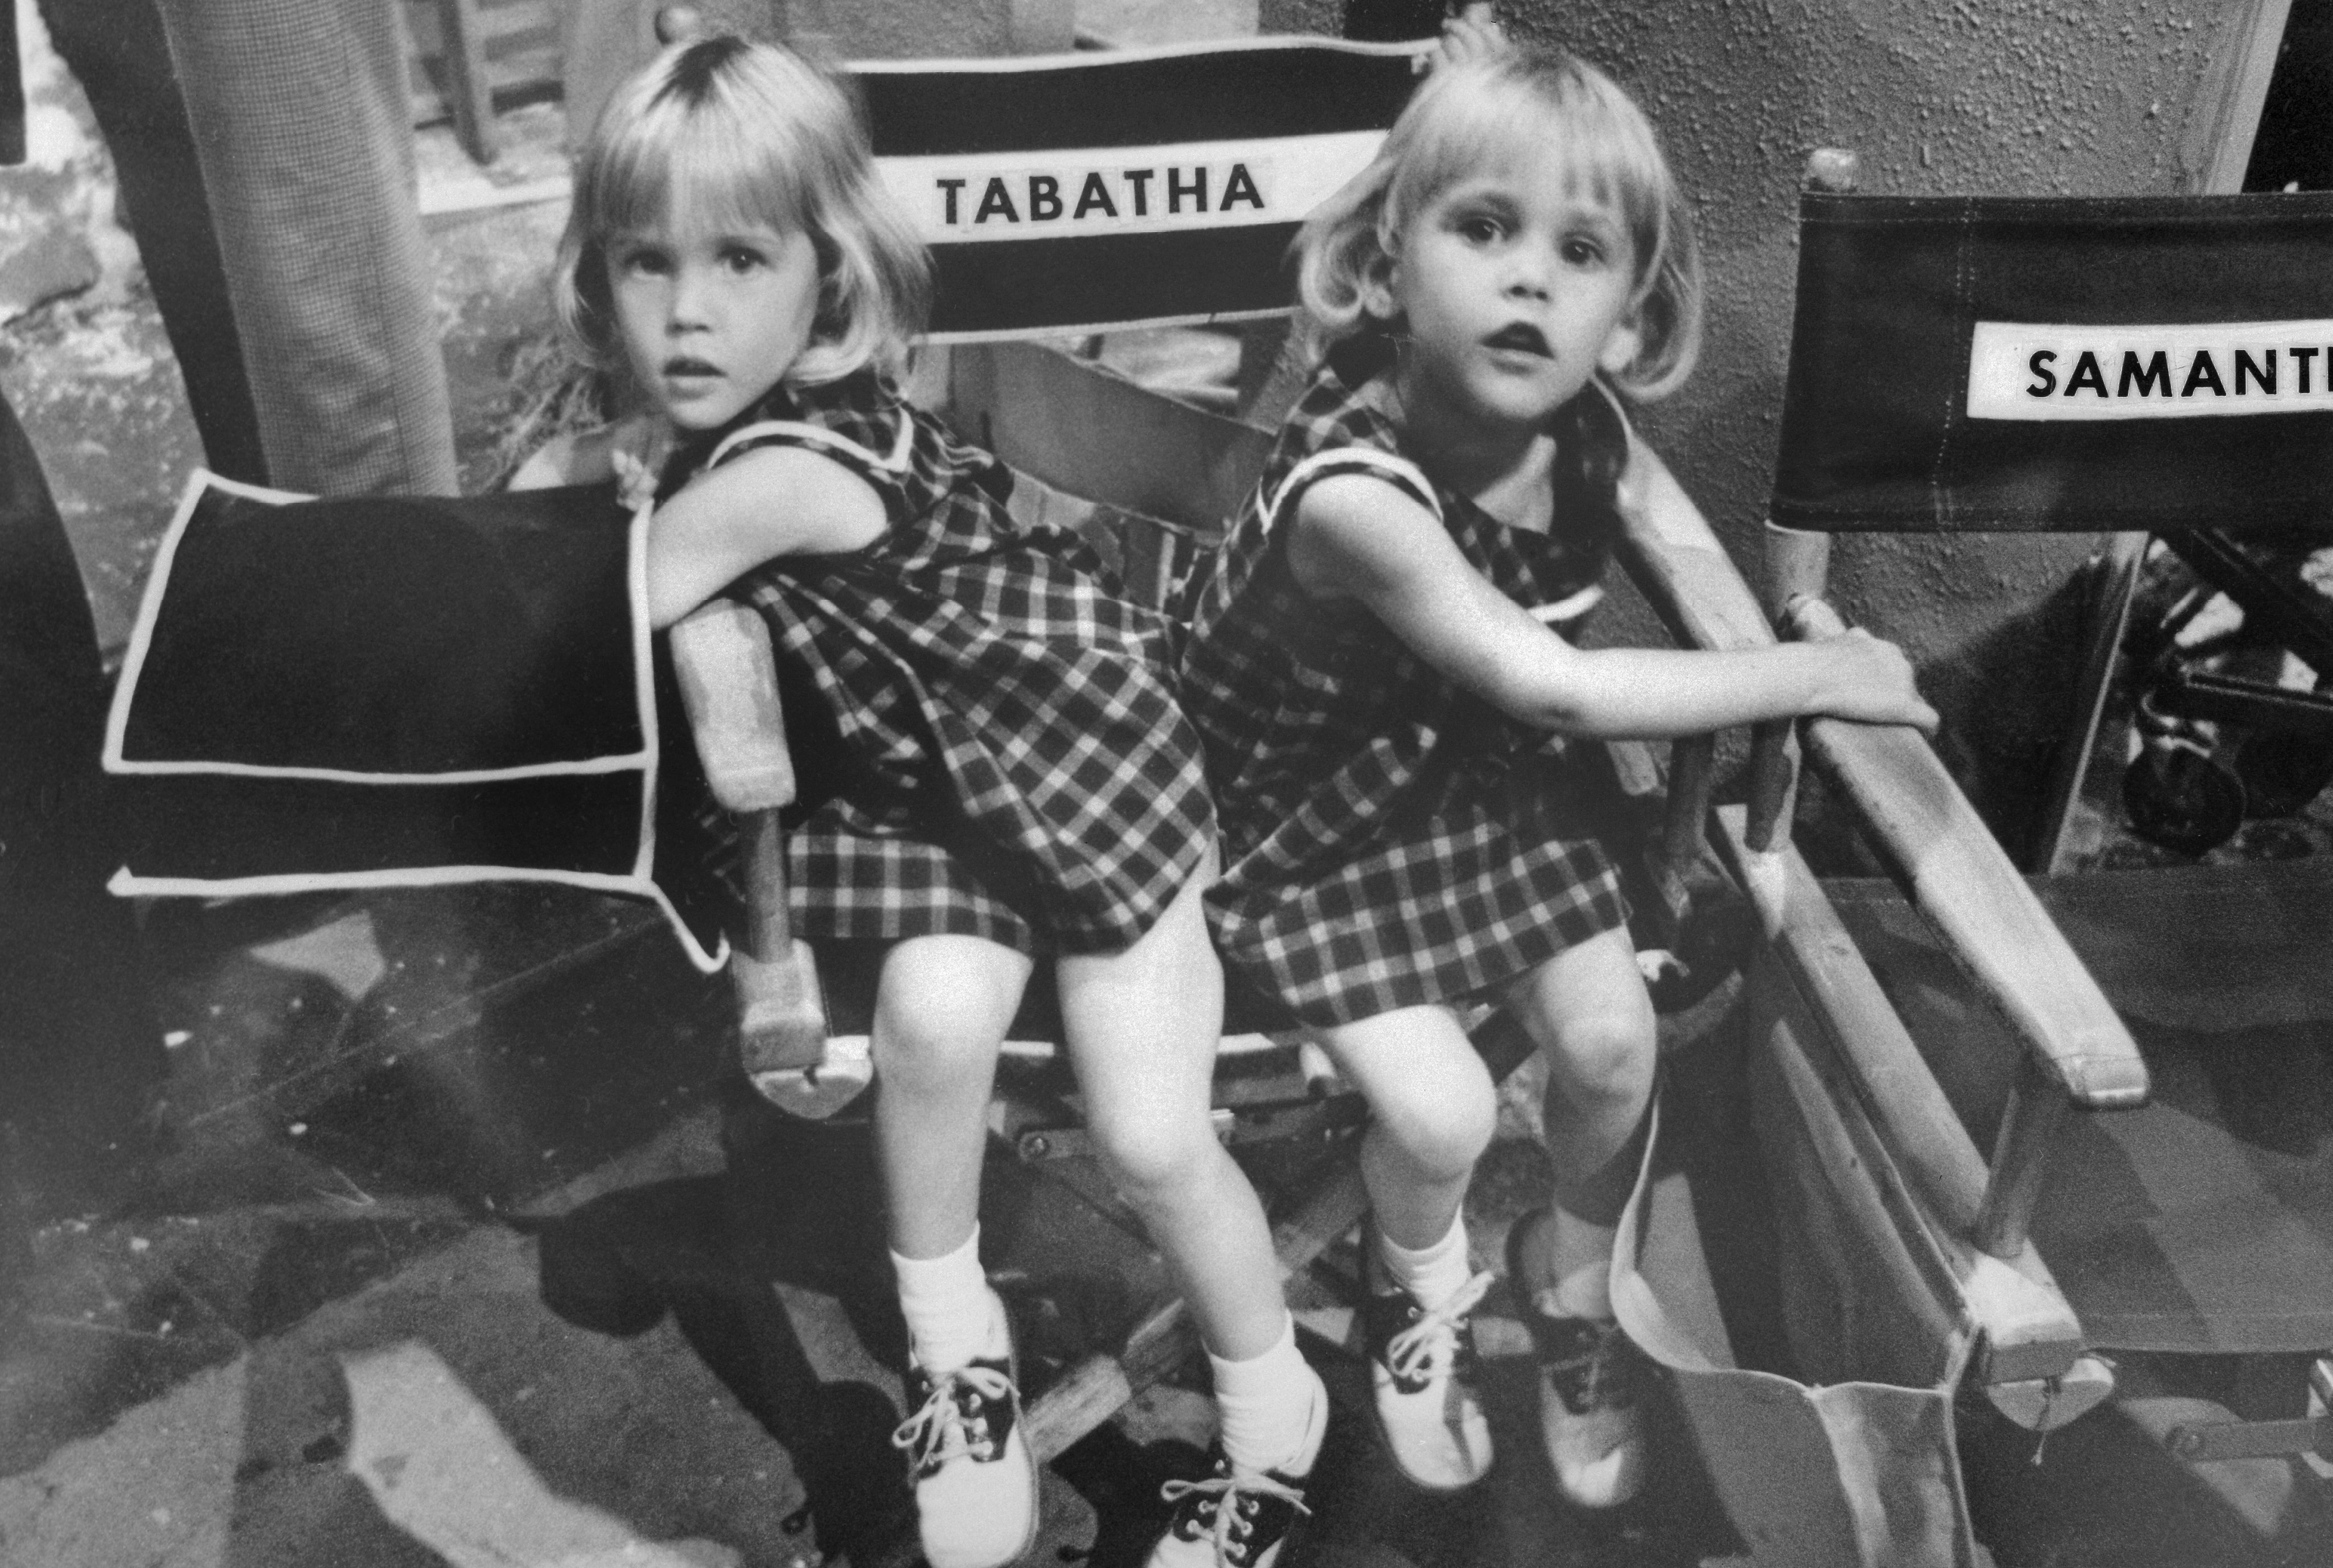 Pictured: (L) Diane Murphy and her fraternal twin sister Erin Murphy portray Tabitha Stephens in the TV sitcom, "Bewitched." / Source: Getty Images